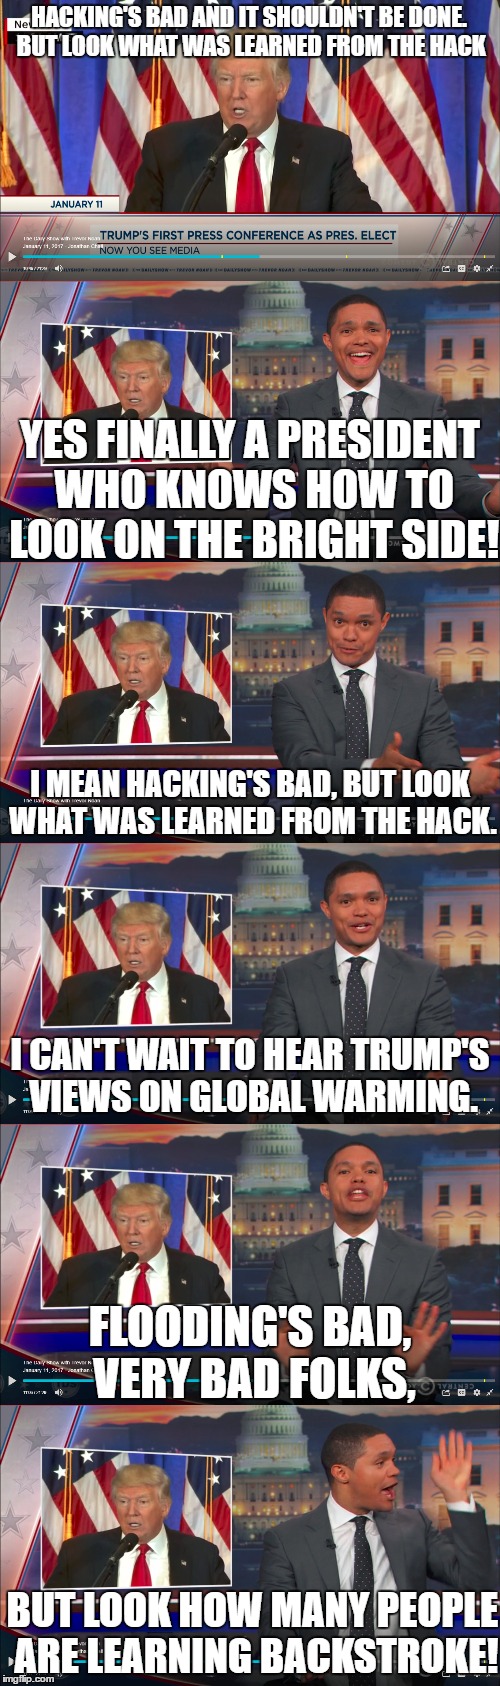 HACKING'S BAD AND IT SHOULDN'T BE DONE. BUT LOOK WHAT WAS LEARNED FROM THE HACK; YES FINALLY A PRESIDENT WHO KNOWS HOW TO LOOK ON THE BRIGHT SIDE! I MEAN HACKING'S BAD, BUT LOOK WHAT WAS LEARNED FROM THE HACK. I CAN'T WAIT TO HEAR TRUMP'S VIEWS ON GLOBAL WARMING. FLOODING'S BAD, VERY BAD FOLKS, BUT LOOK HOW MANY PEOPLE ARE LEARNING BACKSTROKE! | image tagged in donald trump,trevor noah | made w/ Imgflip meme maker